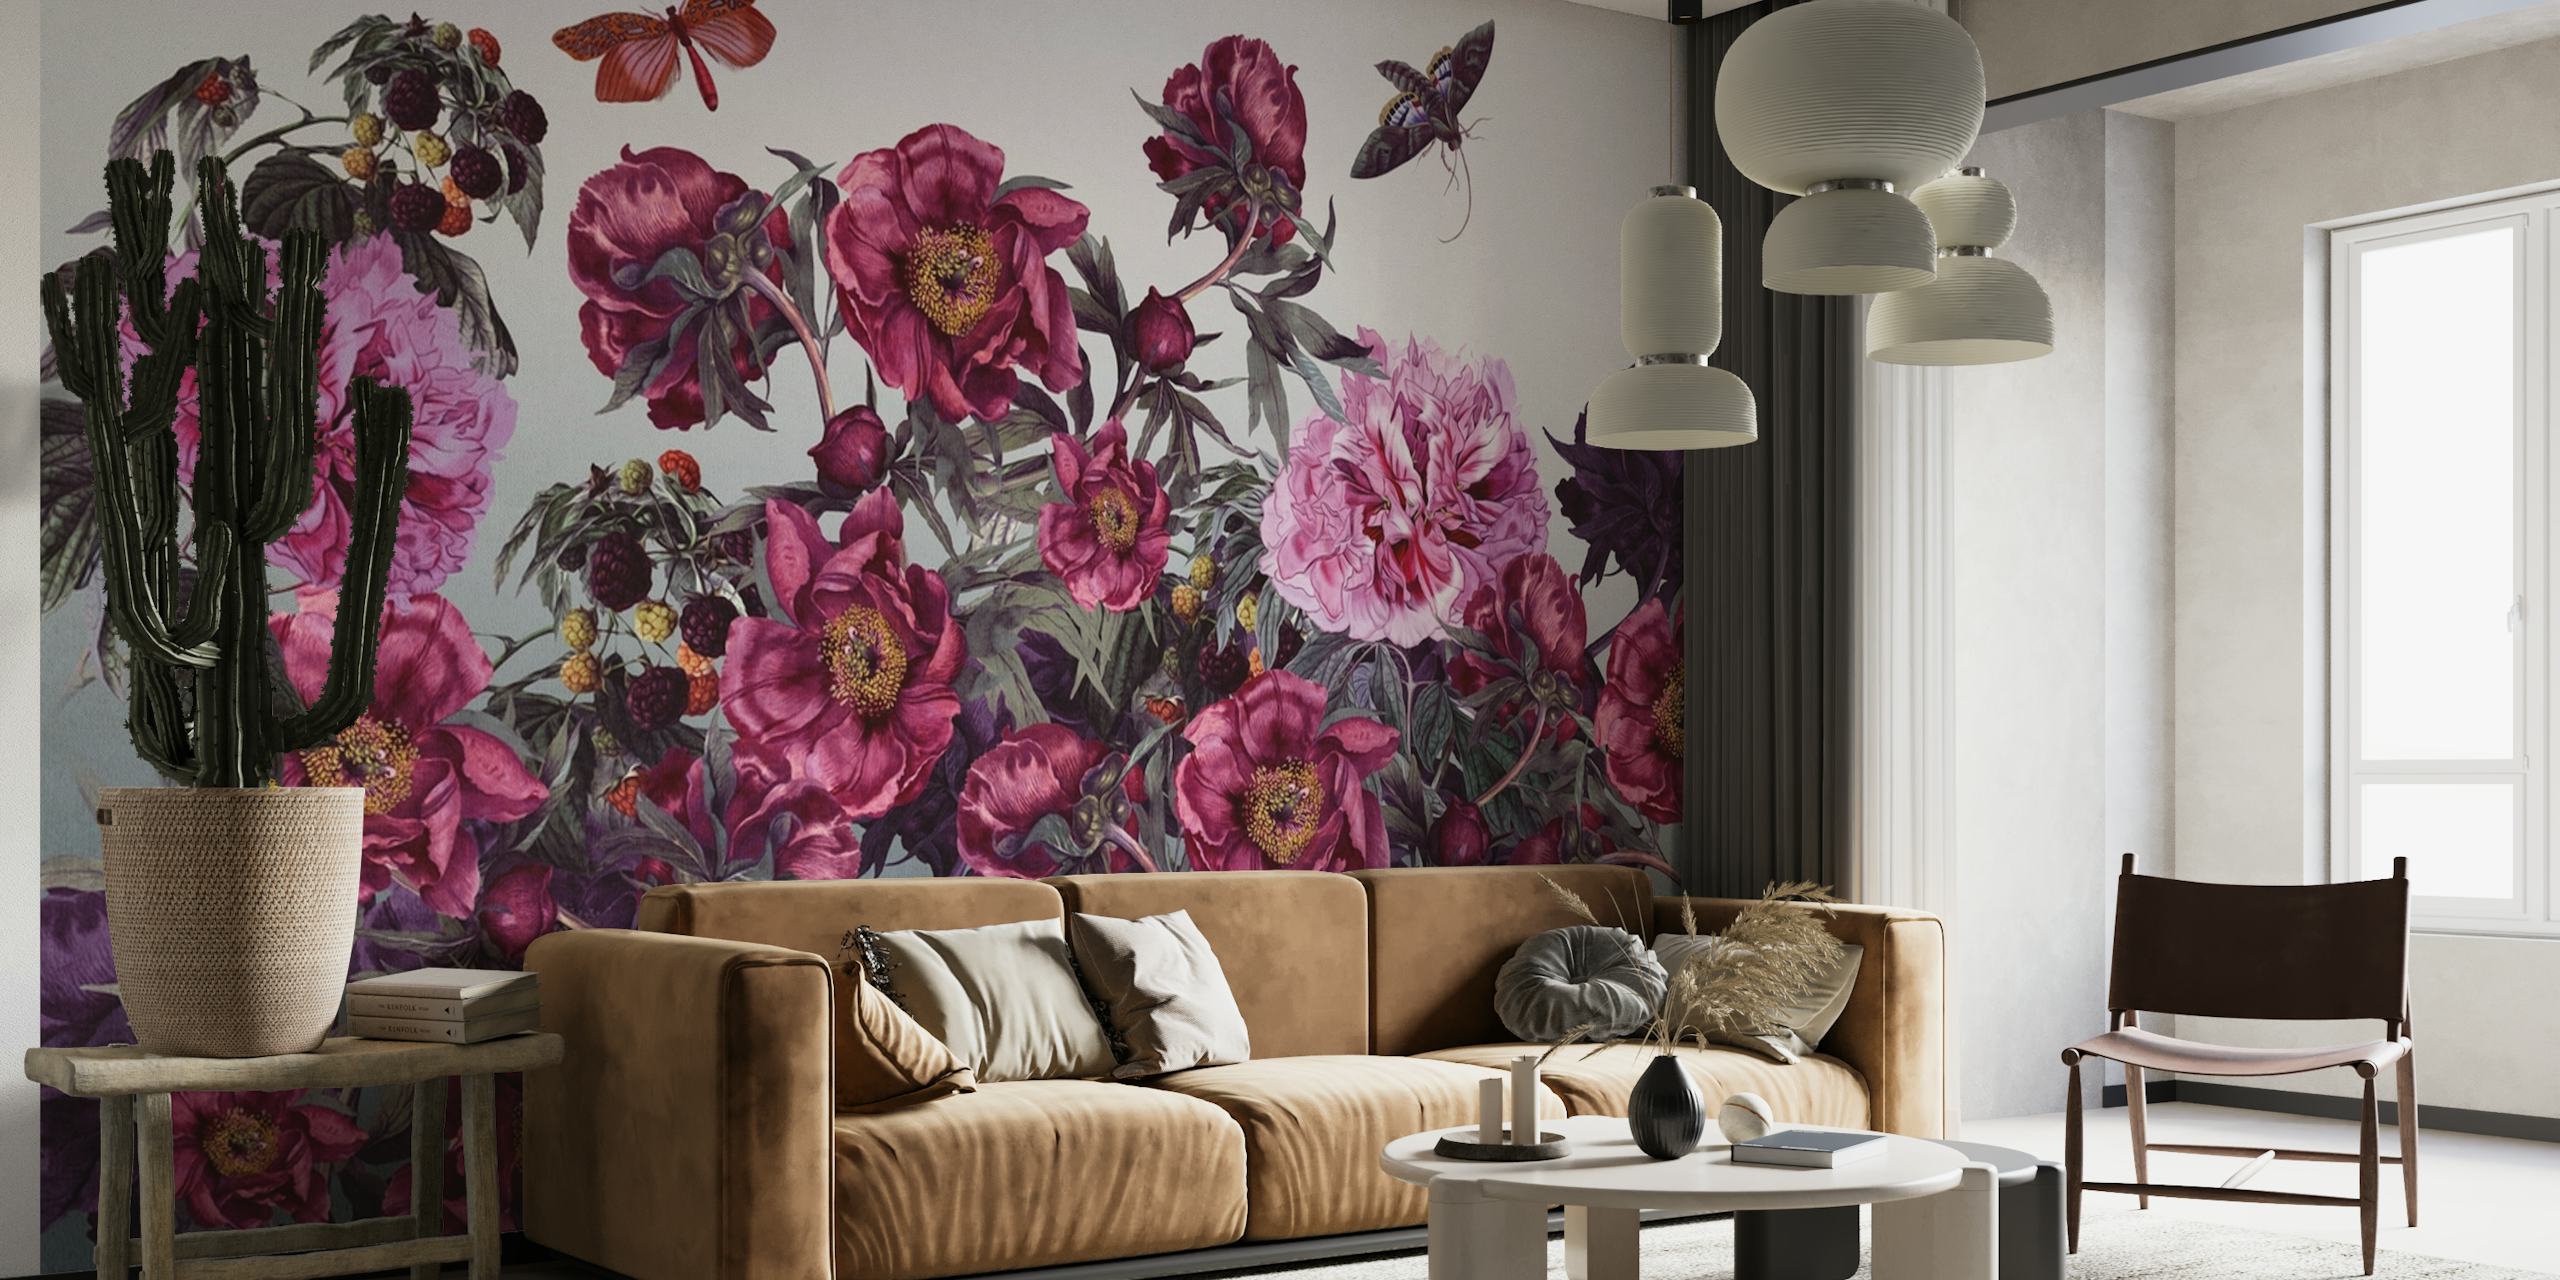 Wall mural with a variety of pink and purple peony flowers, green foliage, and a butterfly.